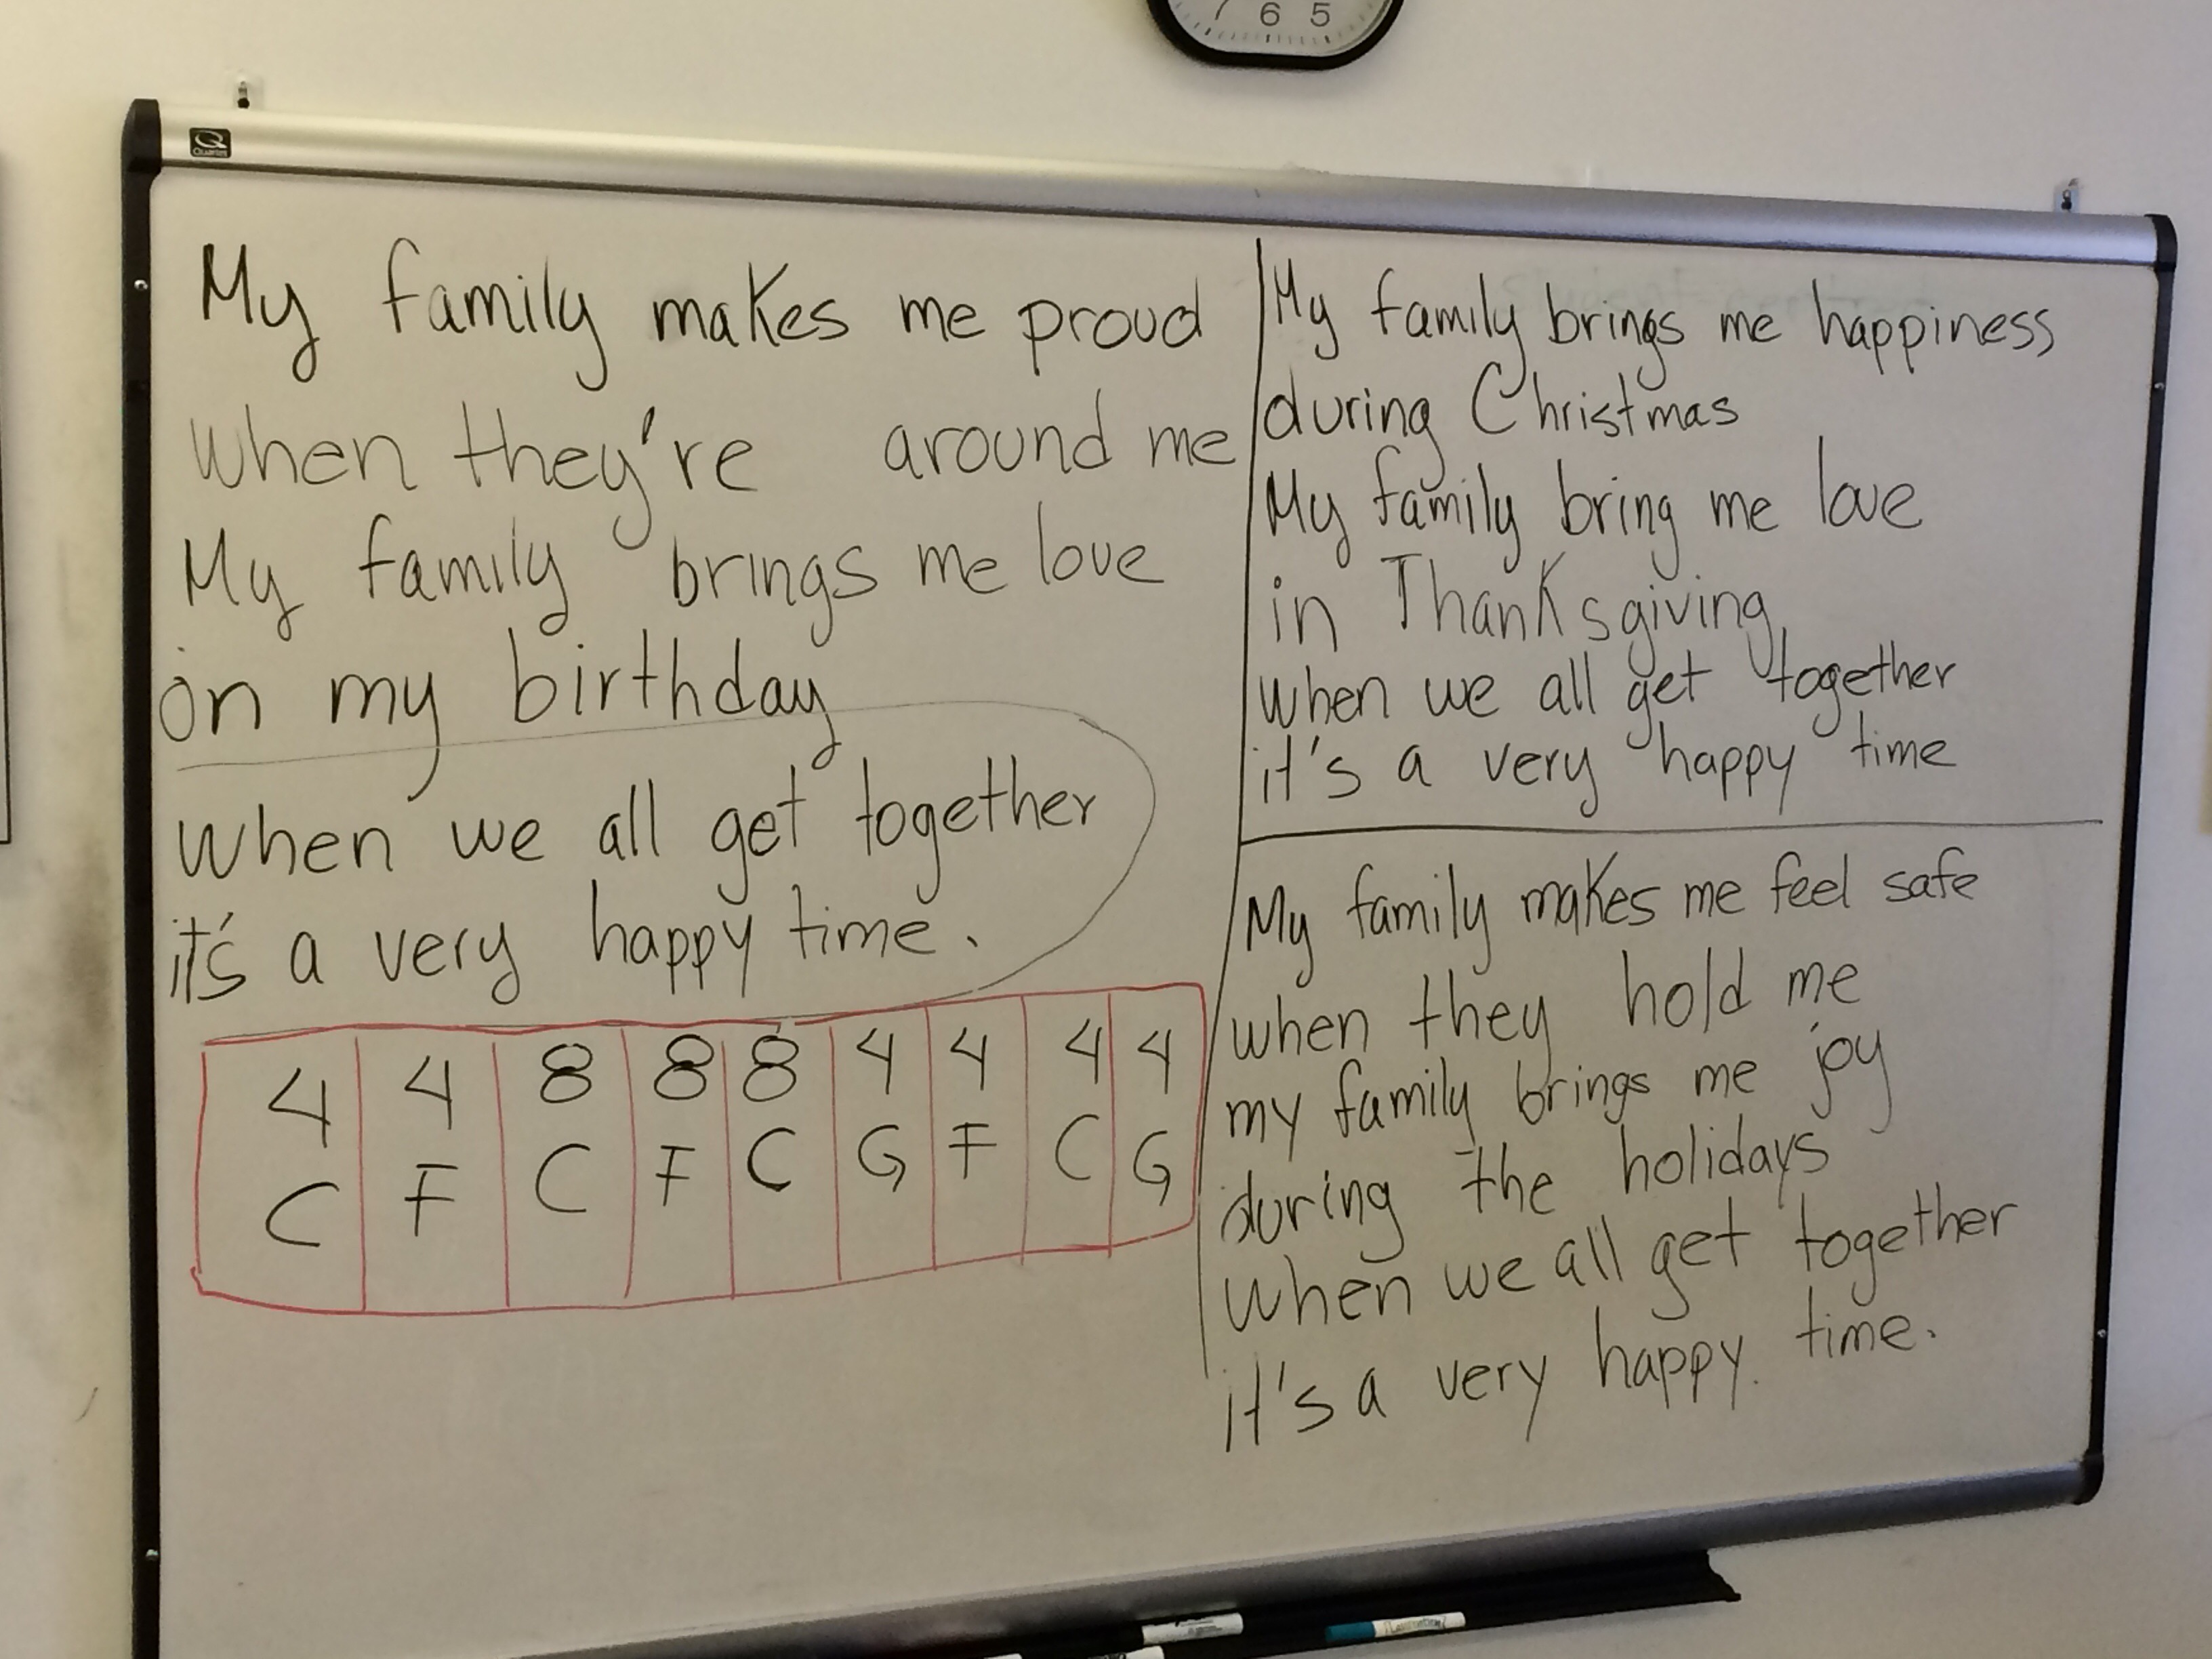 photo of the whiteboard showing revised version of kids' first song.